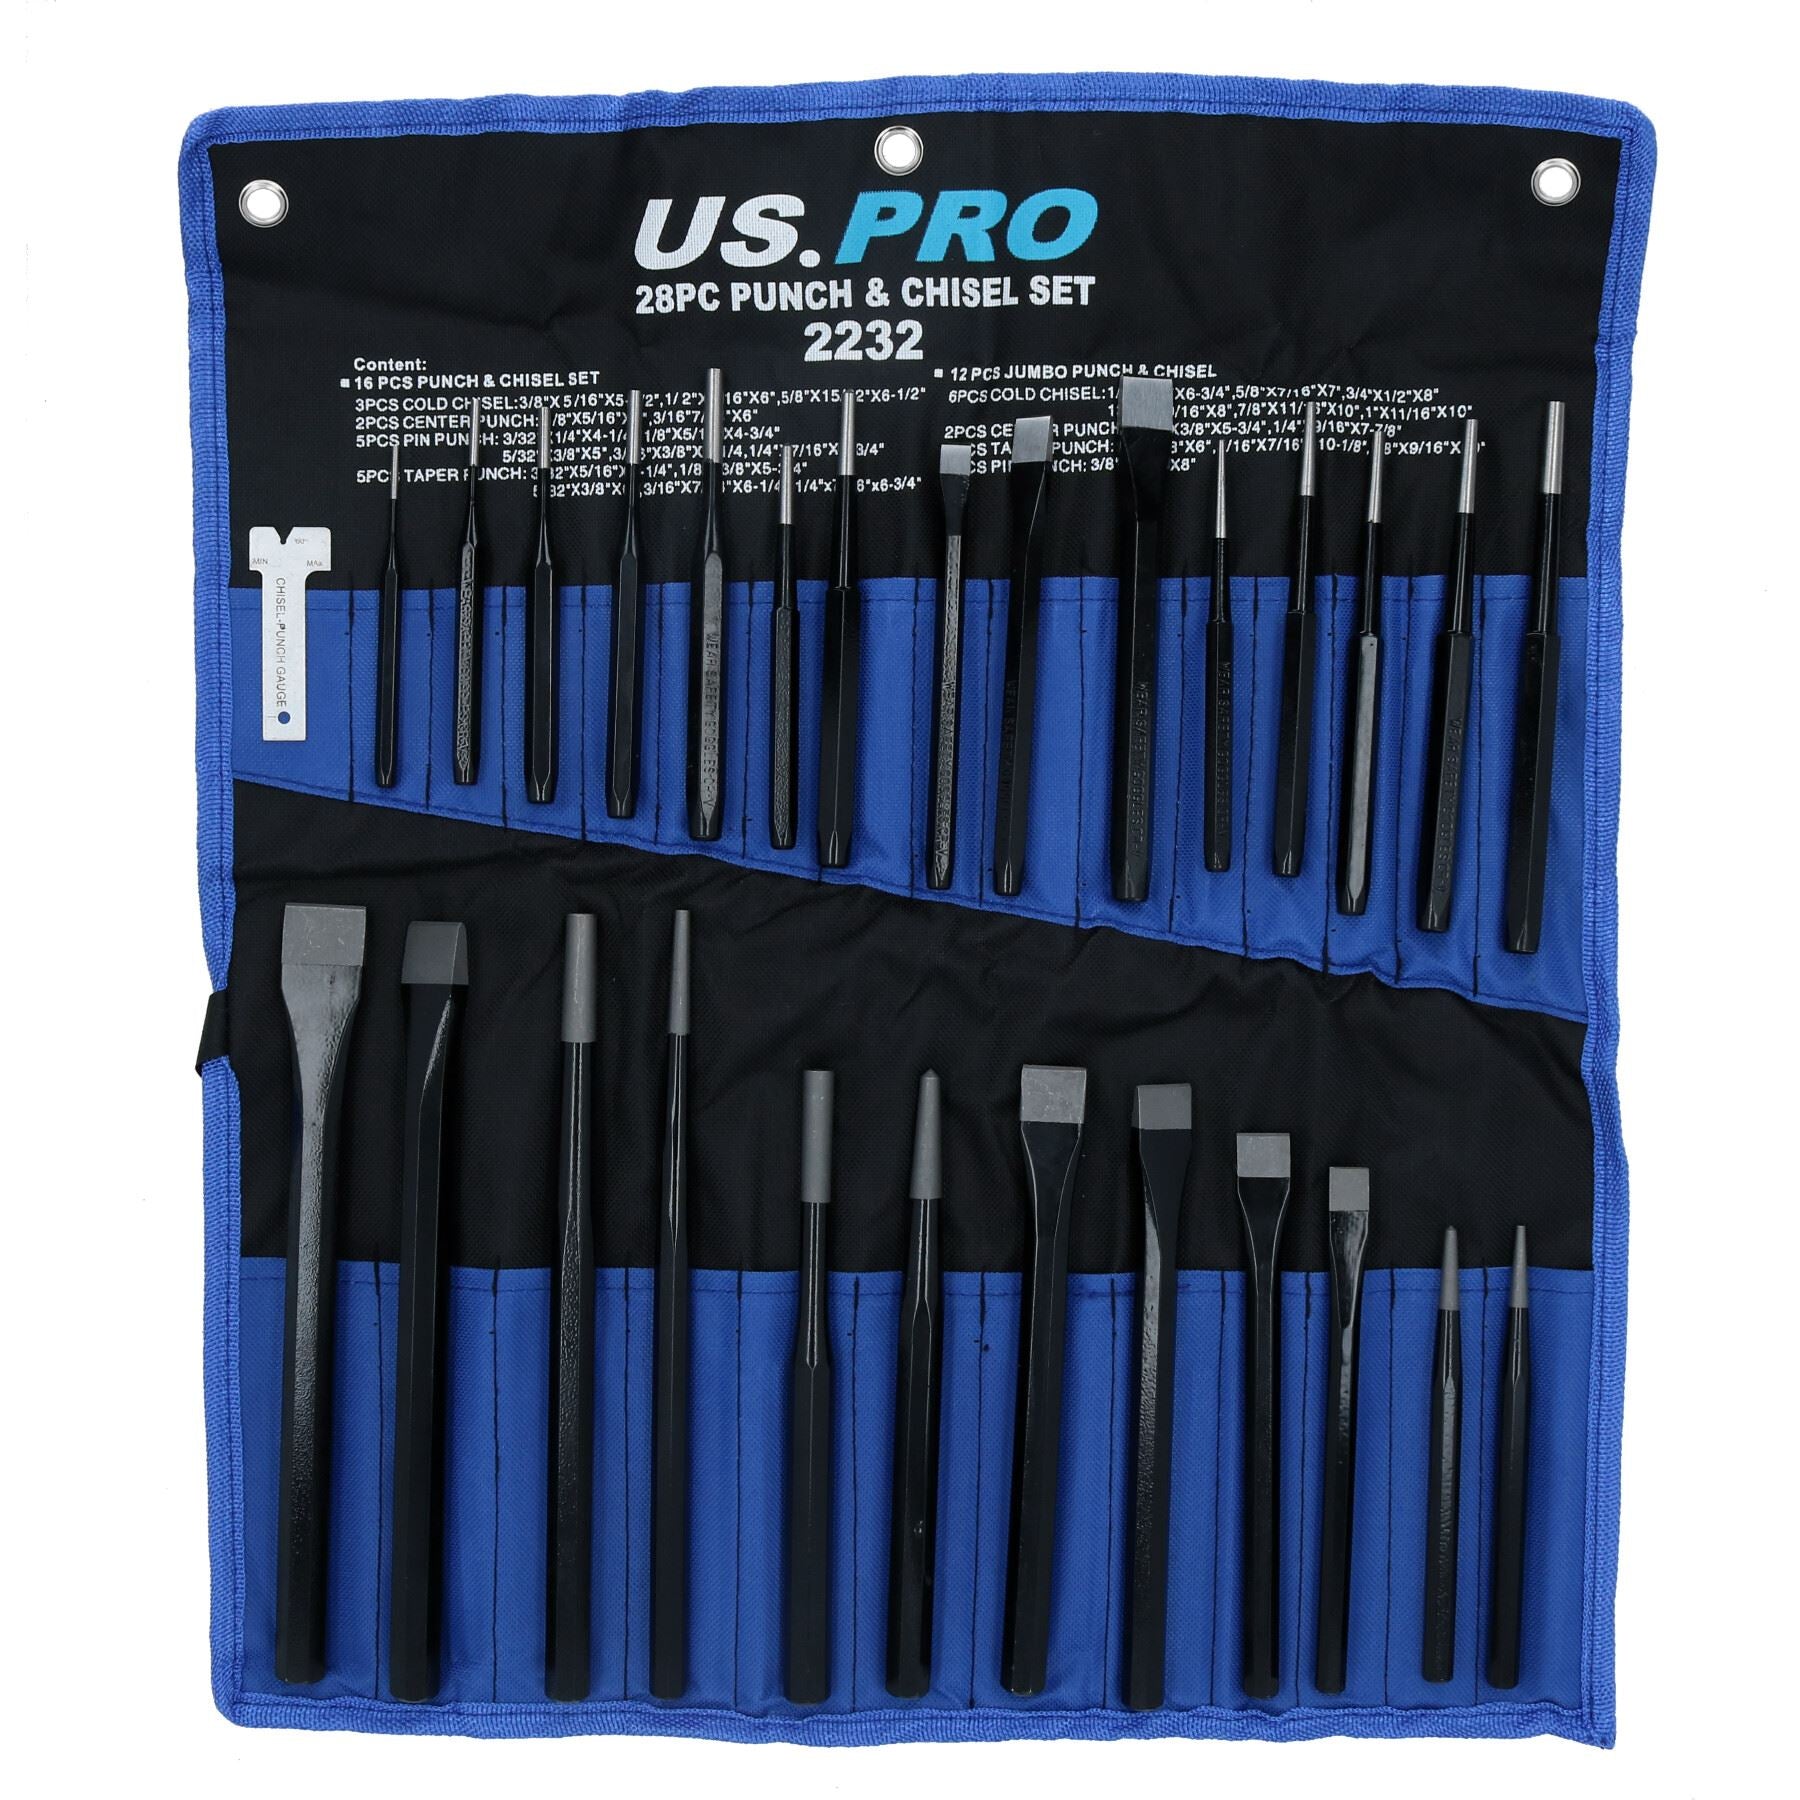 Punch and chisel set / taper / pin / centre / cold chisel 28pc set